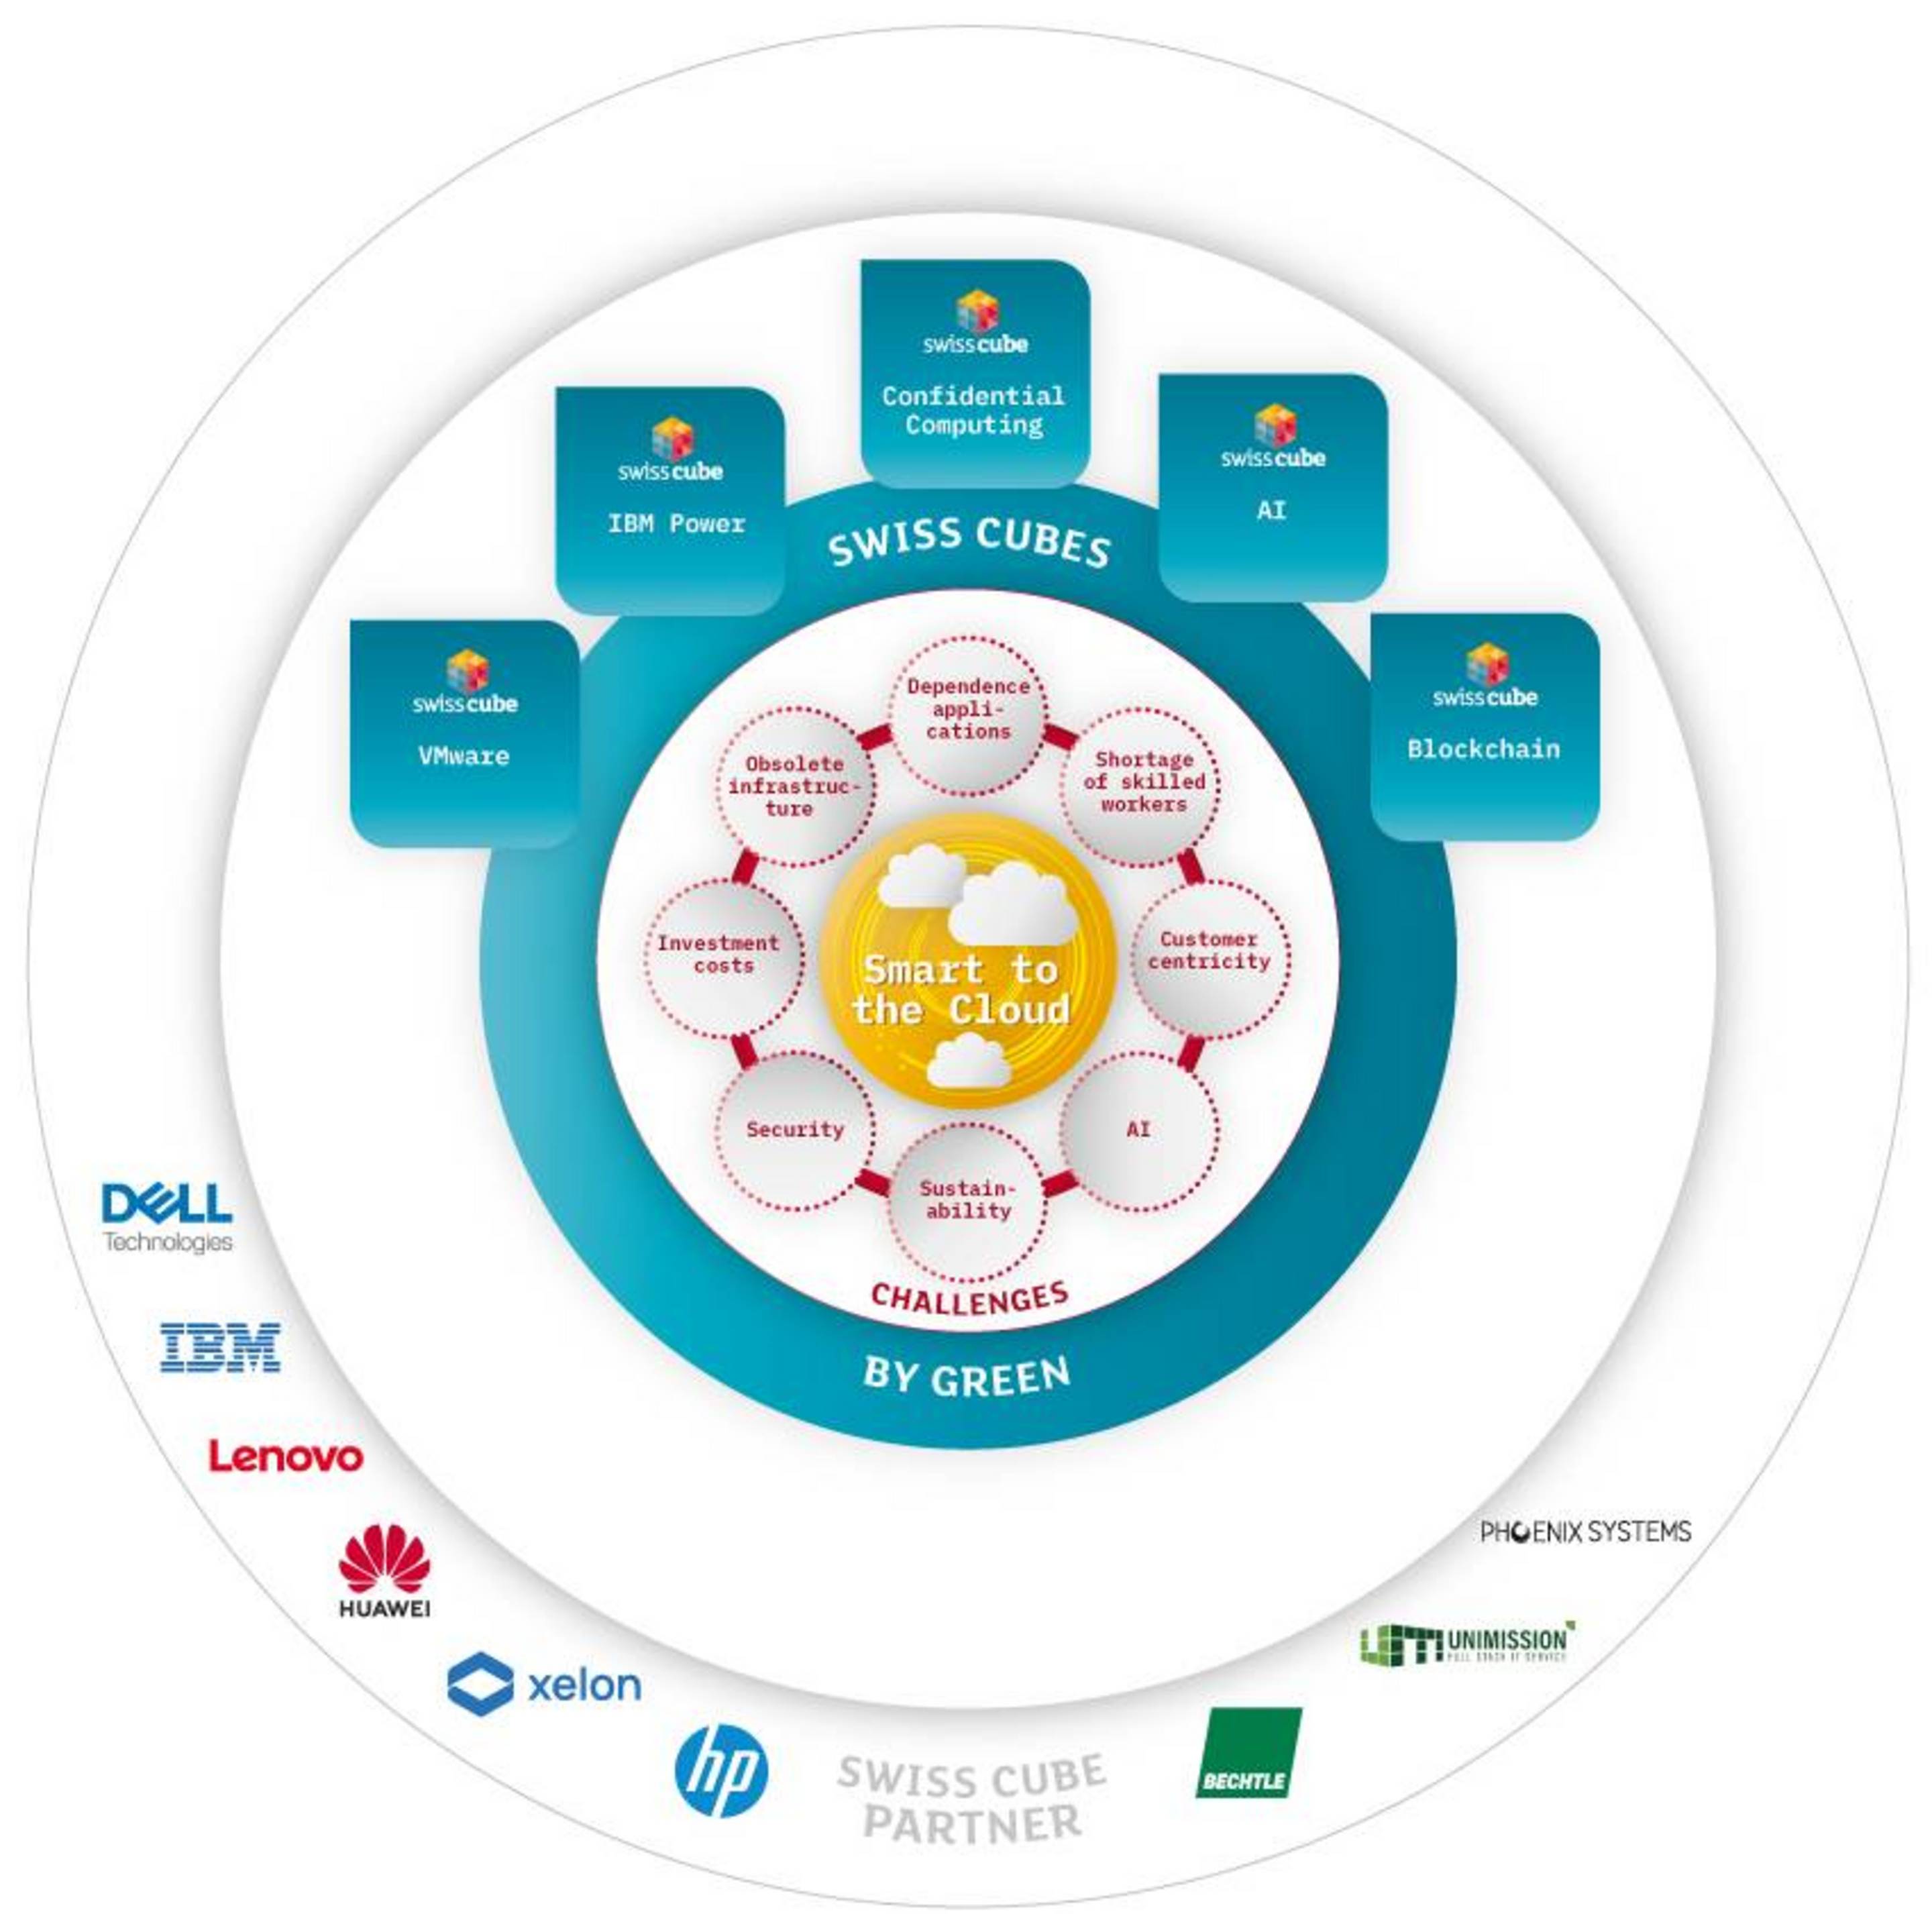 Graphic: Circle with Swiss Cubes, partners and challenges